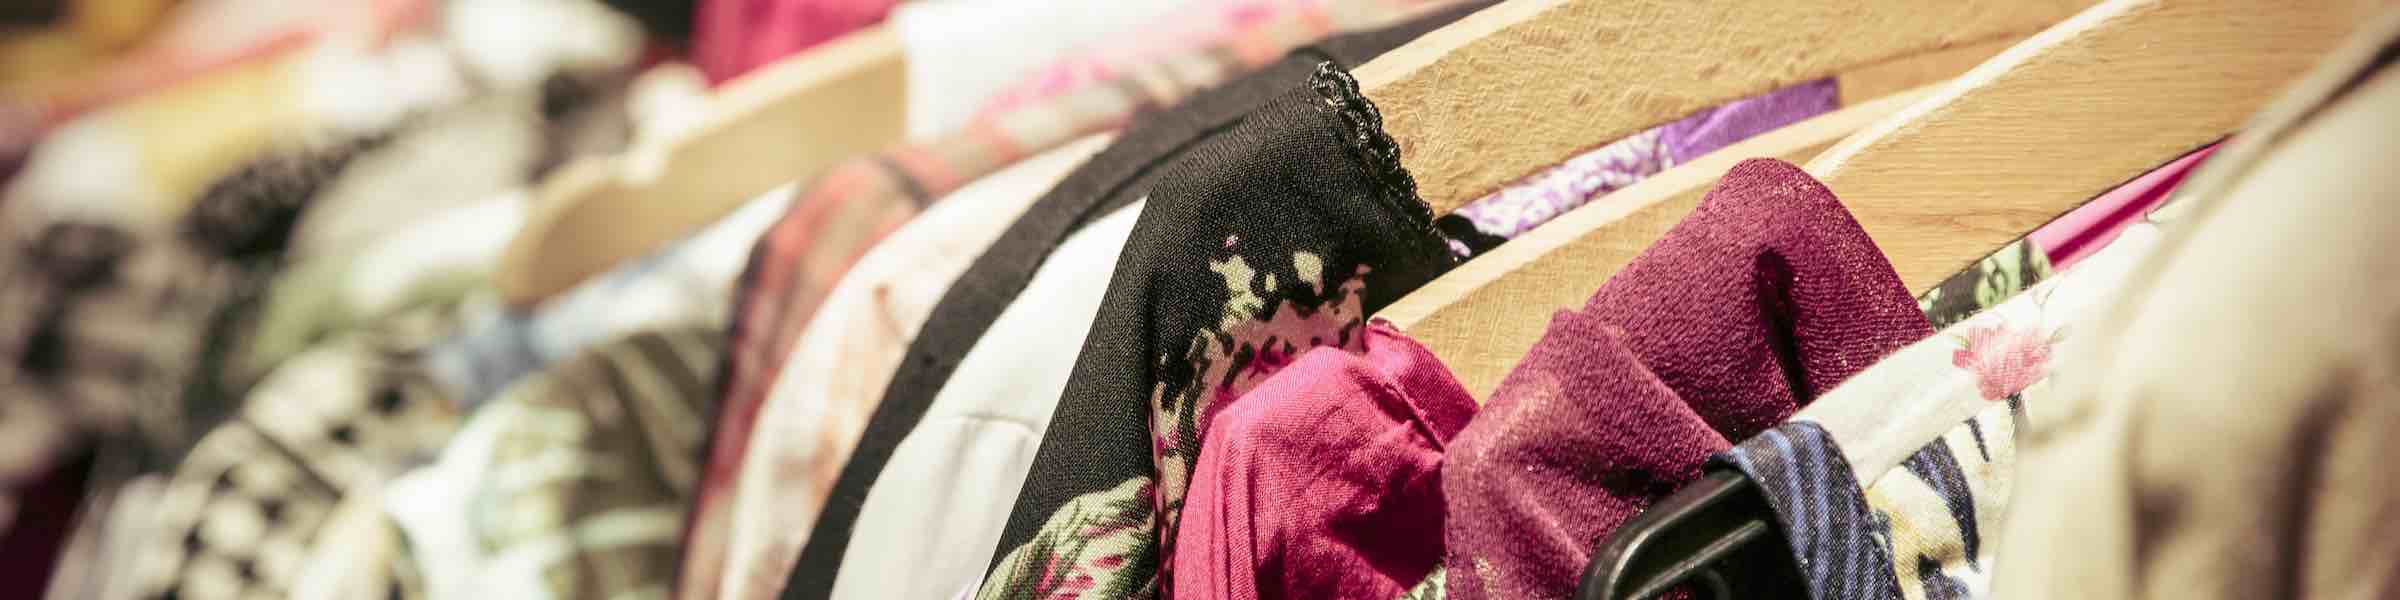 Close up of a rack of women's clothes on hangars.